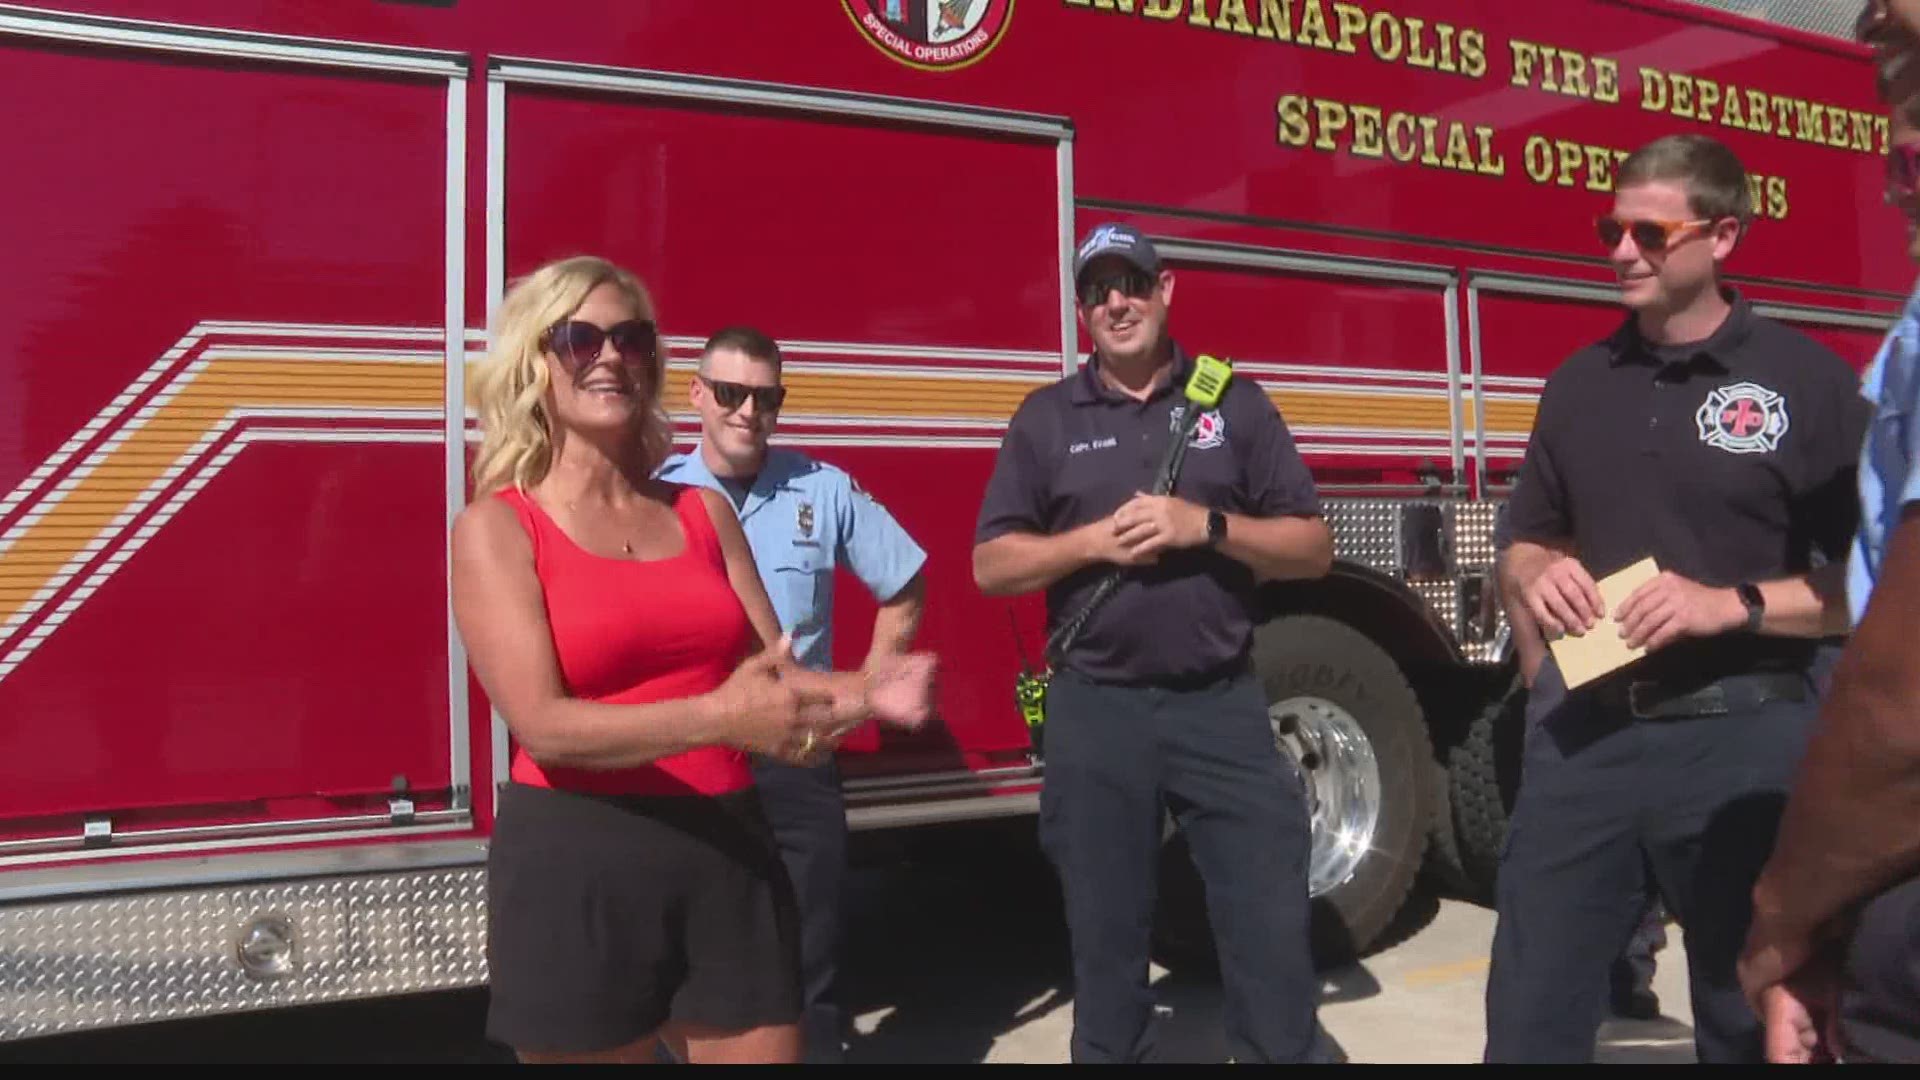 Amy Gillum brought chicken legs and other goodies to the IFD firefighters who found her prosthetic leg in Geist Reservoir.